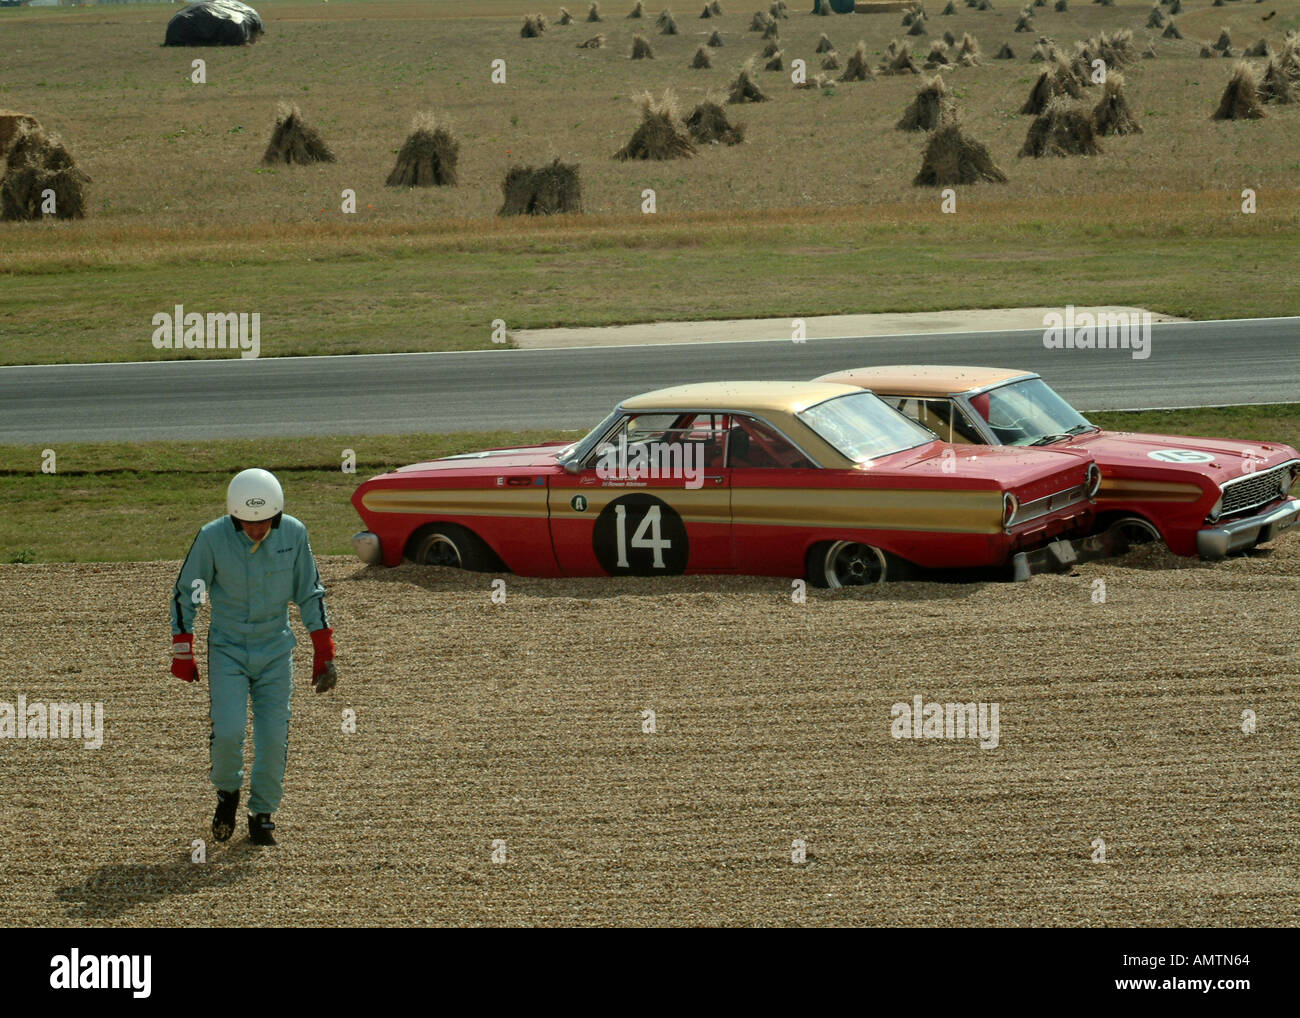 A brace of Ford Falcon Sprints stranded in the gravel at the Goodwood Revival Stock Photo